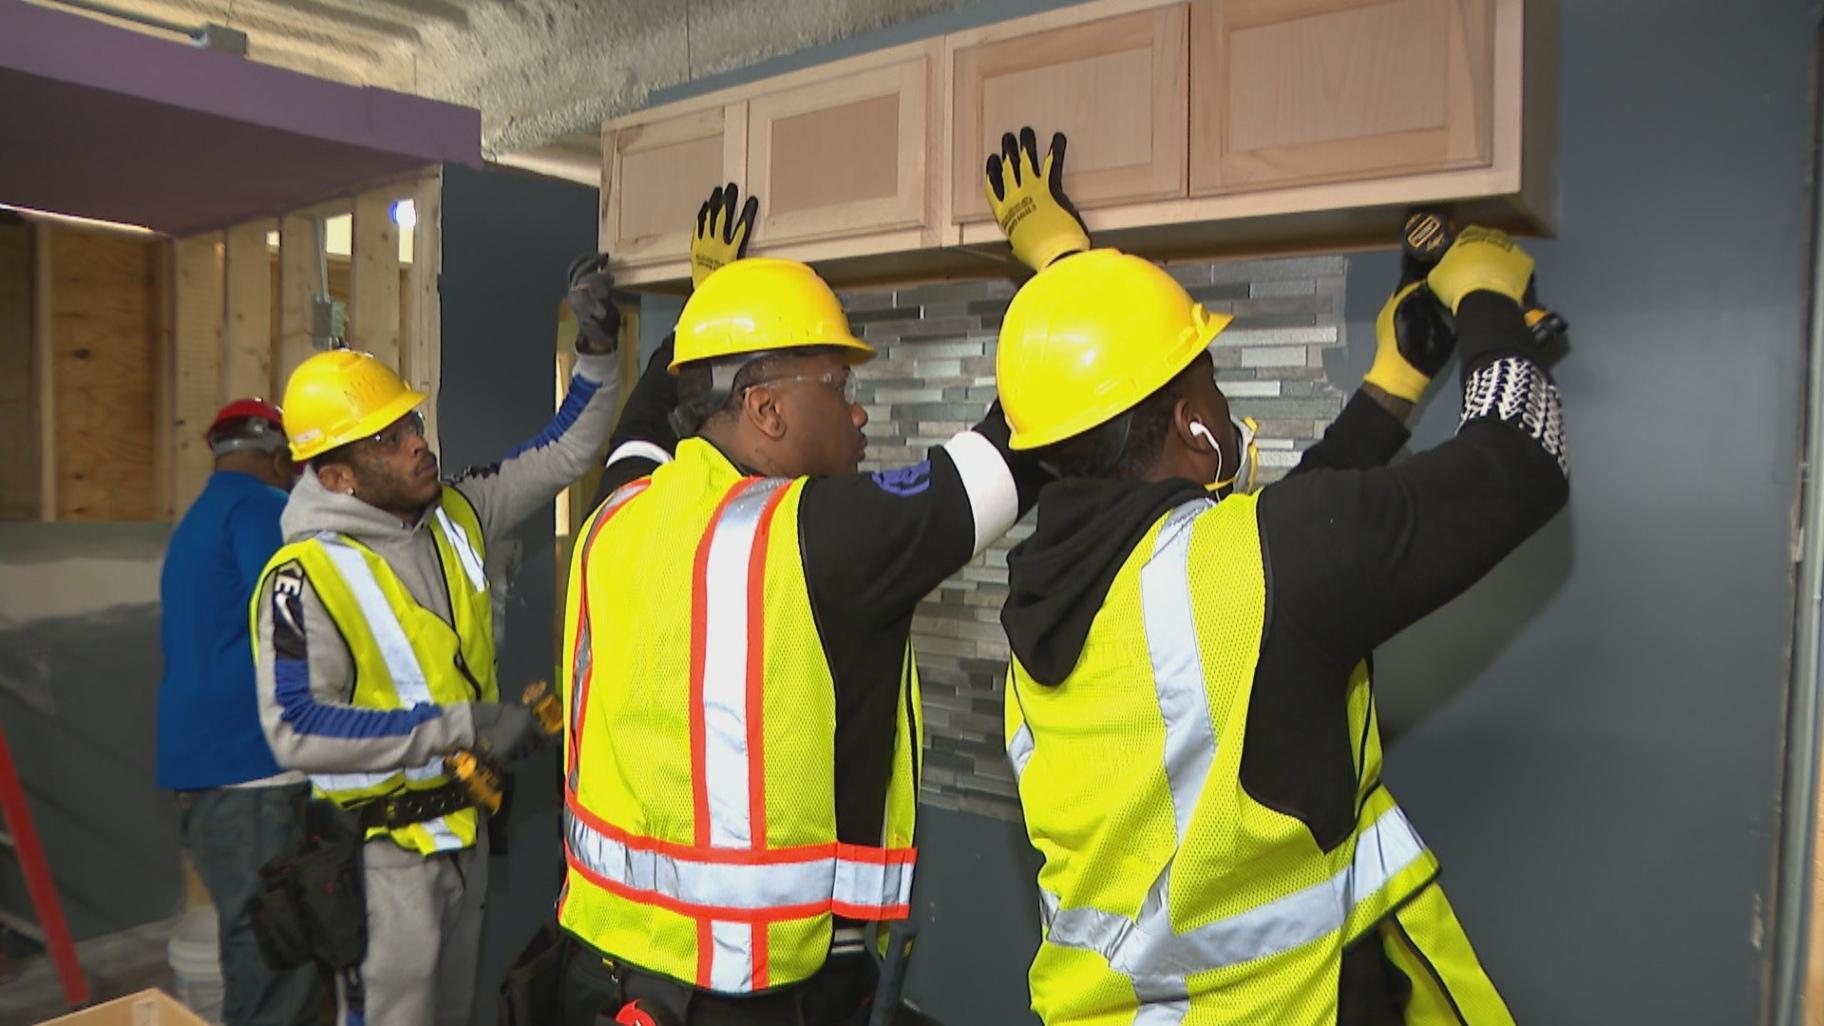 A 14-week construction skills course taught by Jonathan Wilson prepares participants for trade apprenticeships and industry jobs. (WTTW News)